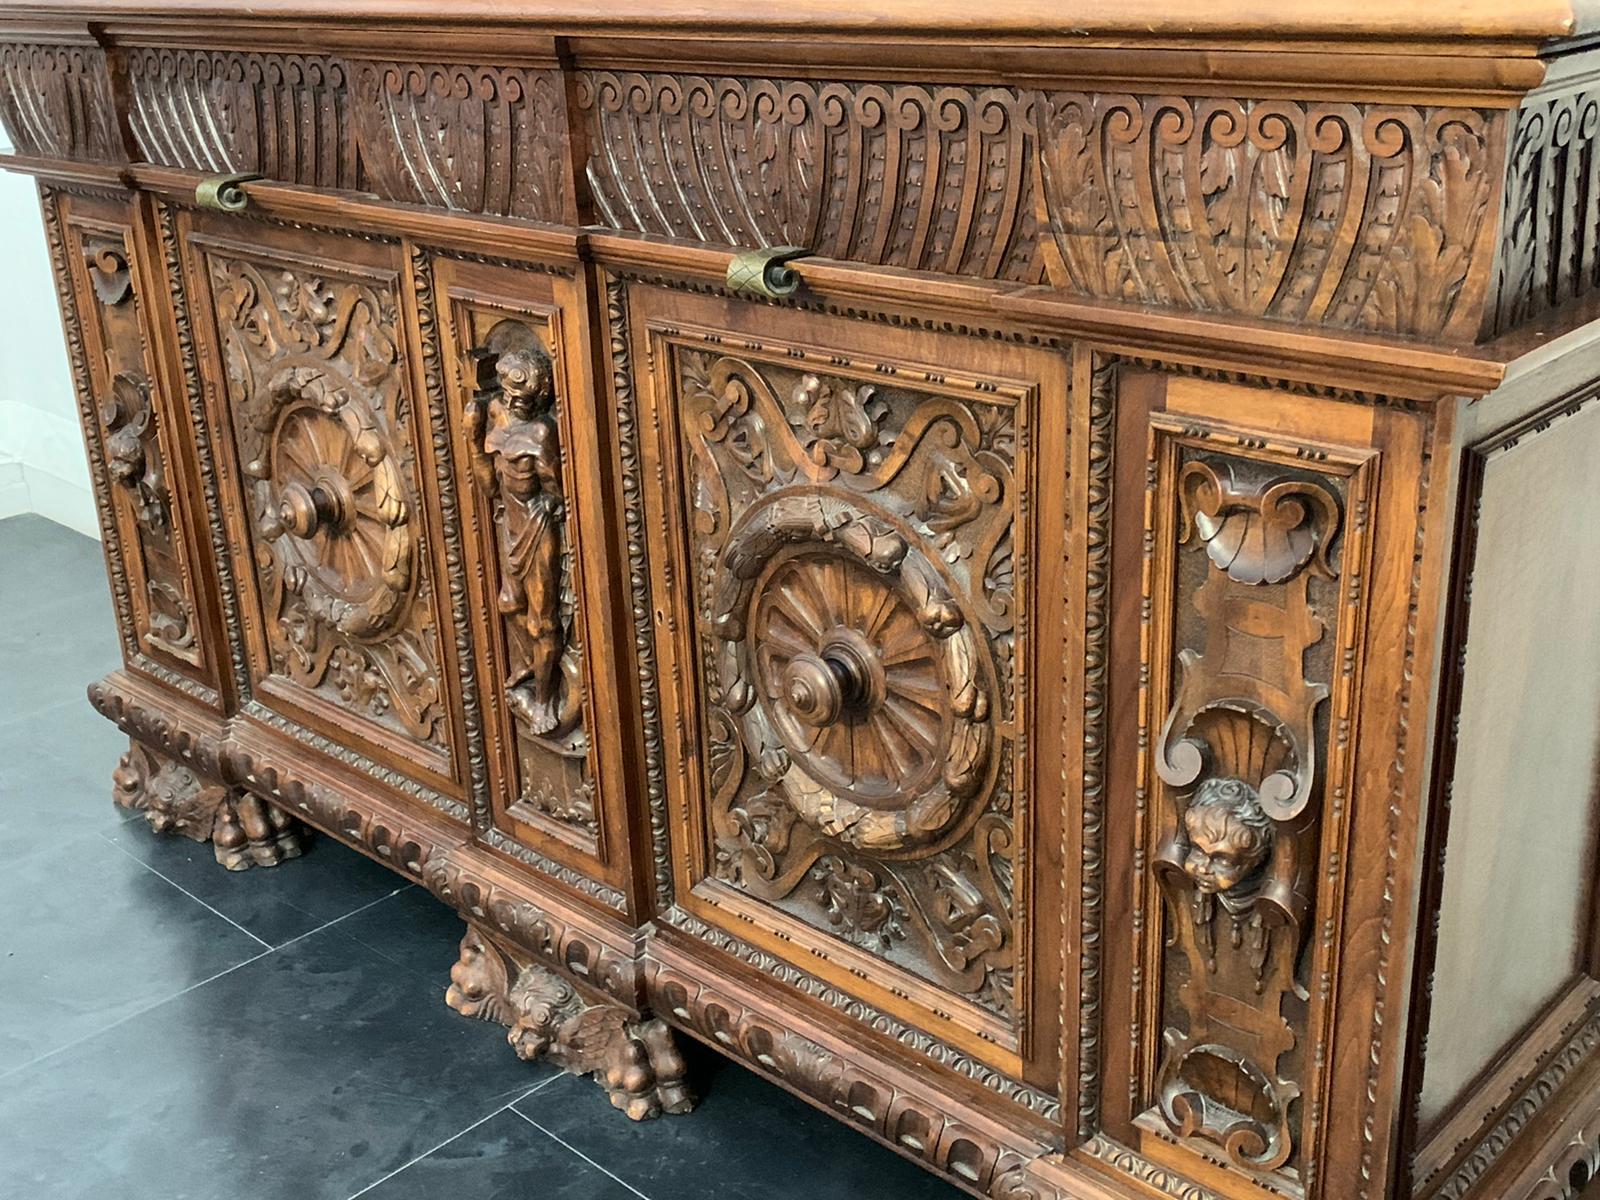 Florentine Renaissance sideboard in blond walnut with bronze handles. Product of high quality and high cabinet making. Tuscany late 19th century early 20th century, provenance villa Campari.
Packaging with bubble wrap and cardboard boxes is